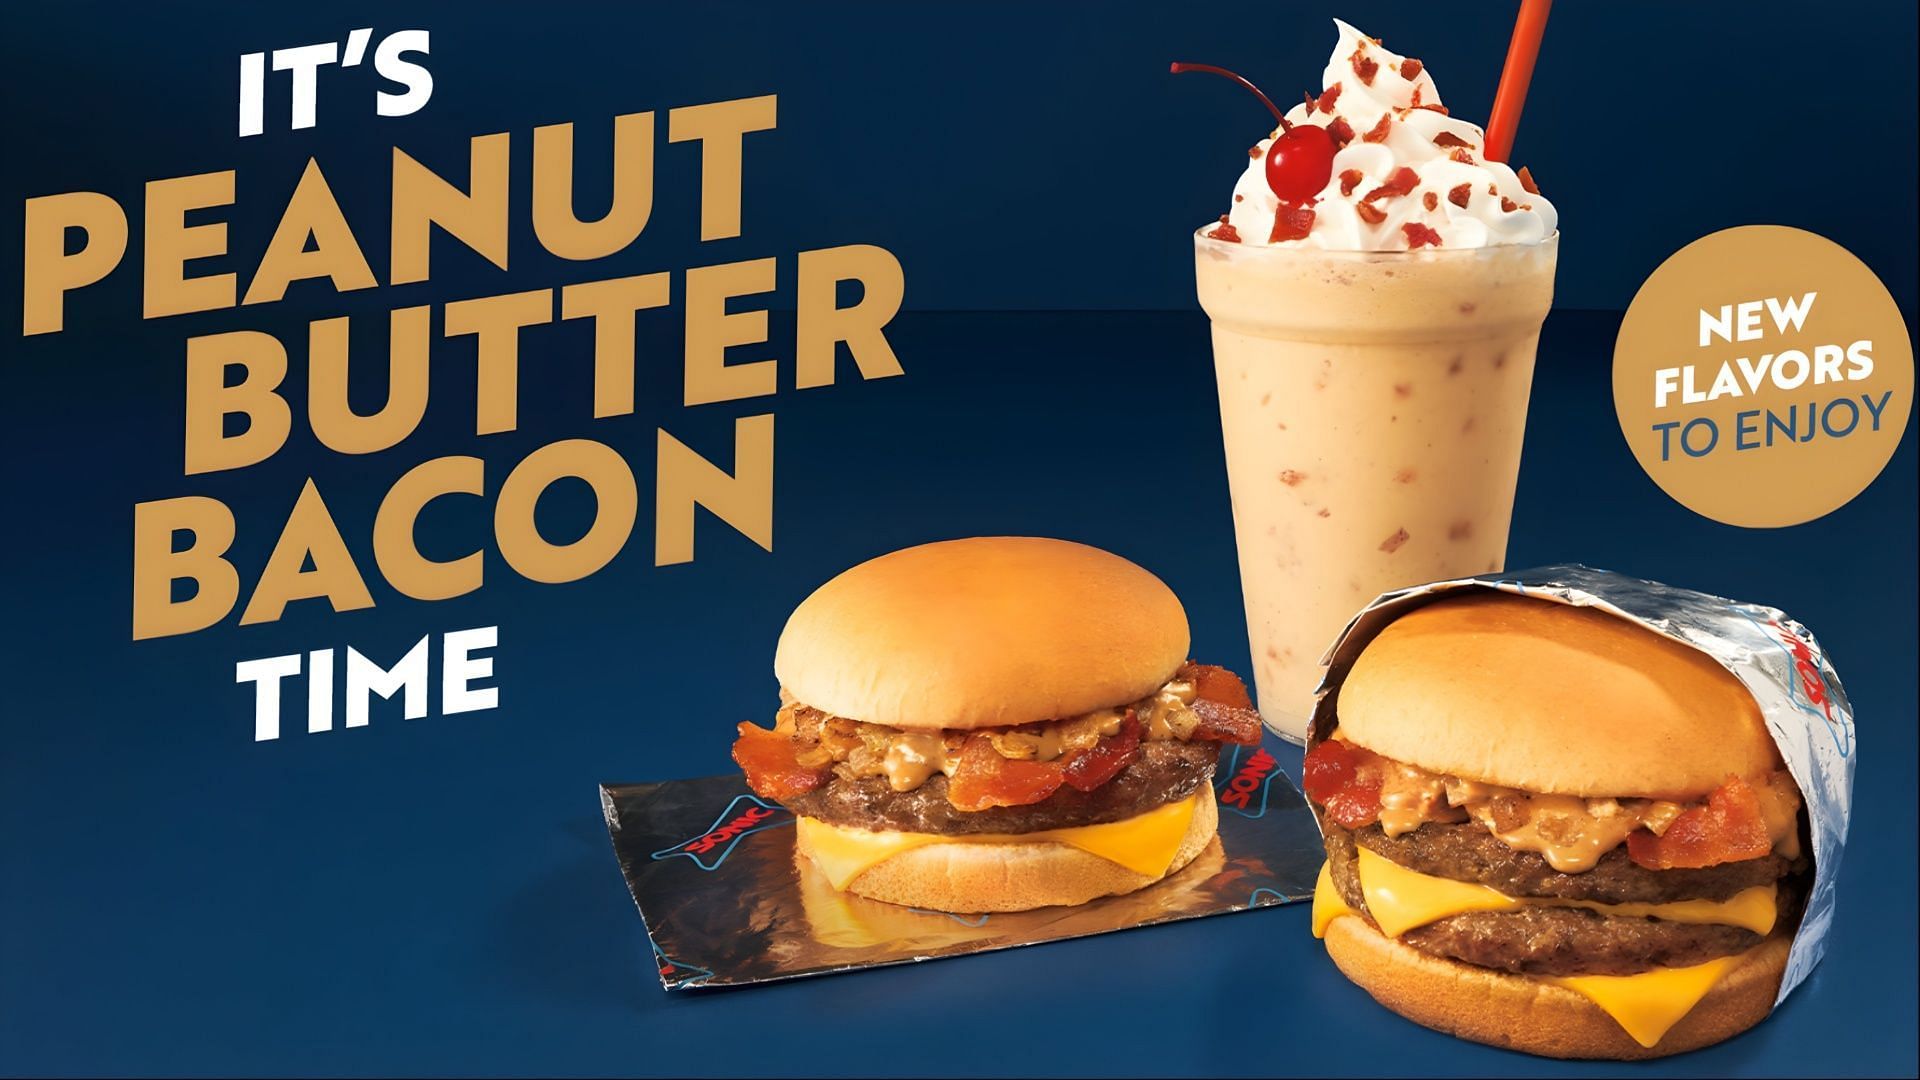 The new peanut butter and bacon-infused cheeseburger and shake will stay on the menu until February 4 (Image via Inspire Brands)